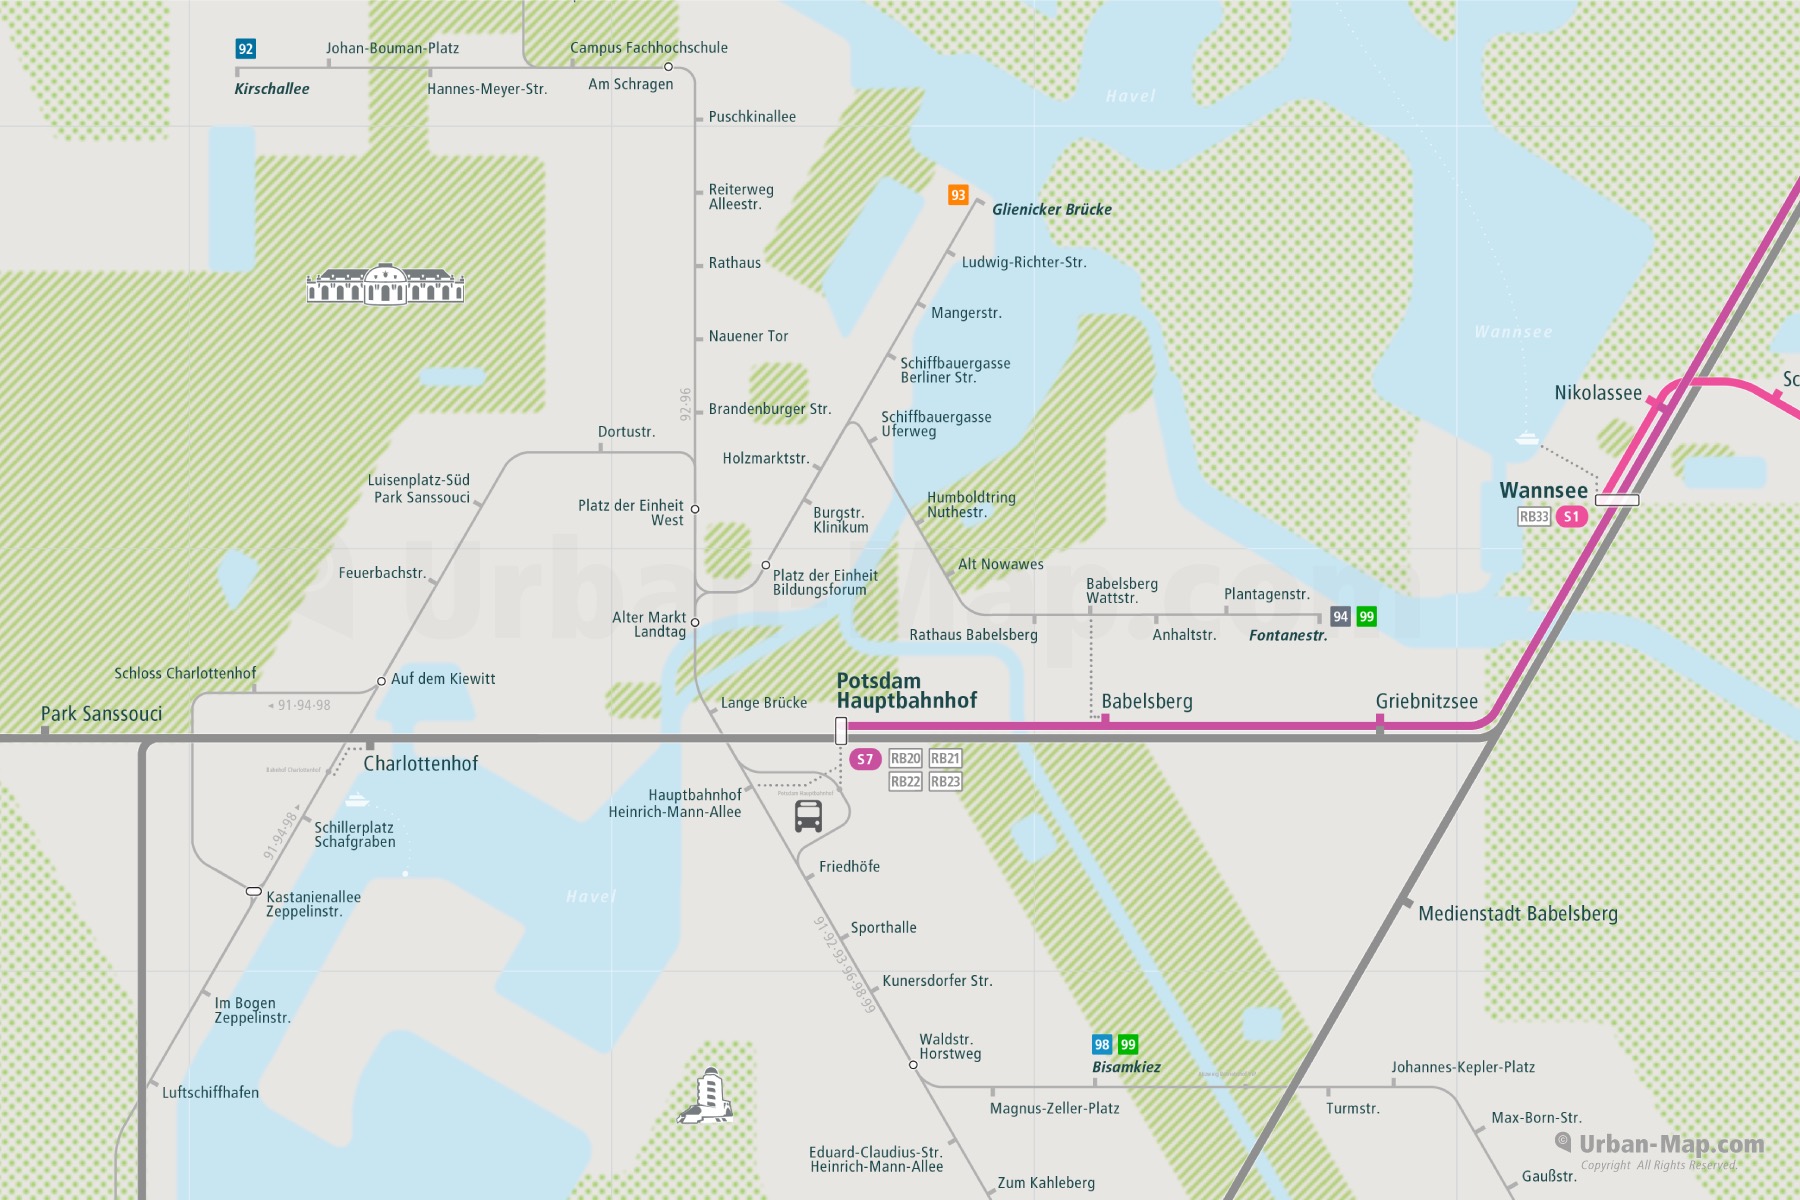 Potsdam City Rail Map shows the train and public transportation routes of S-Bahn S7 and Tram